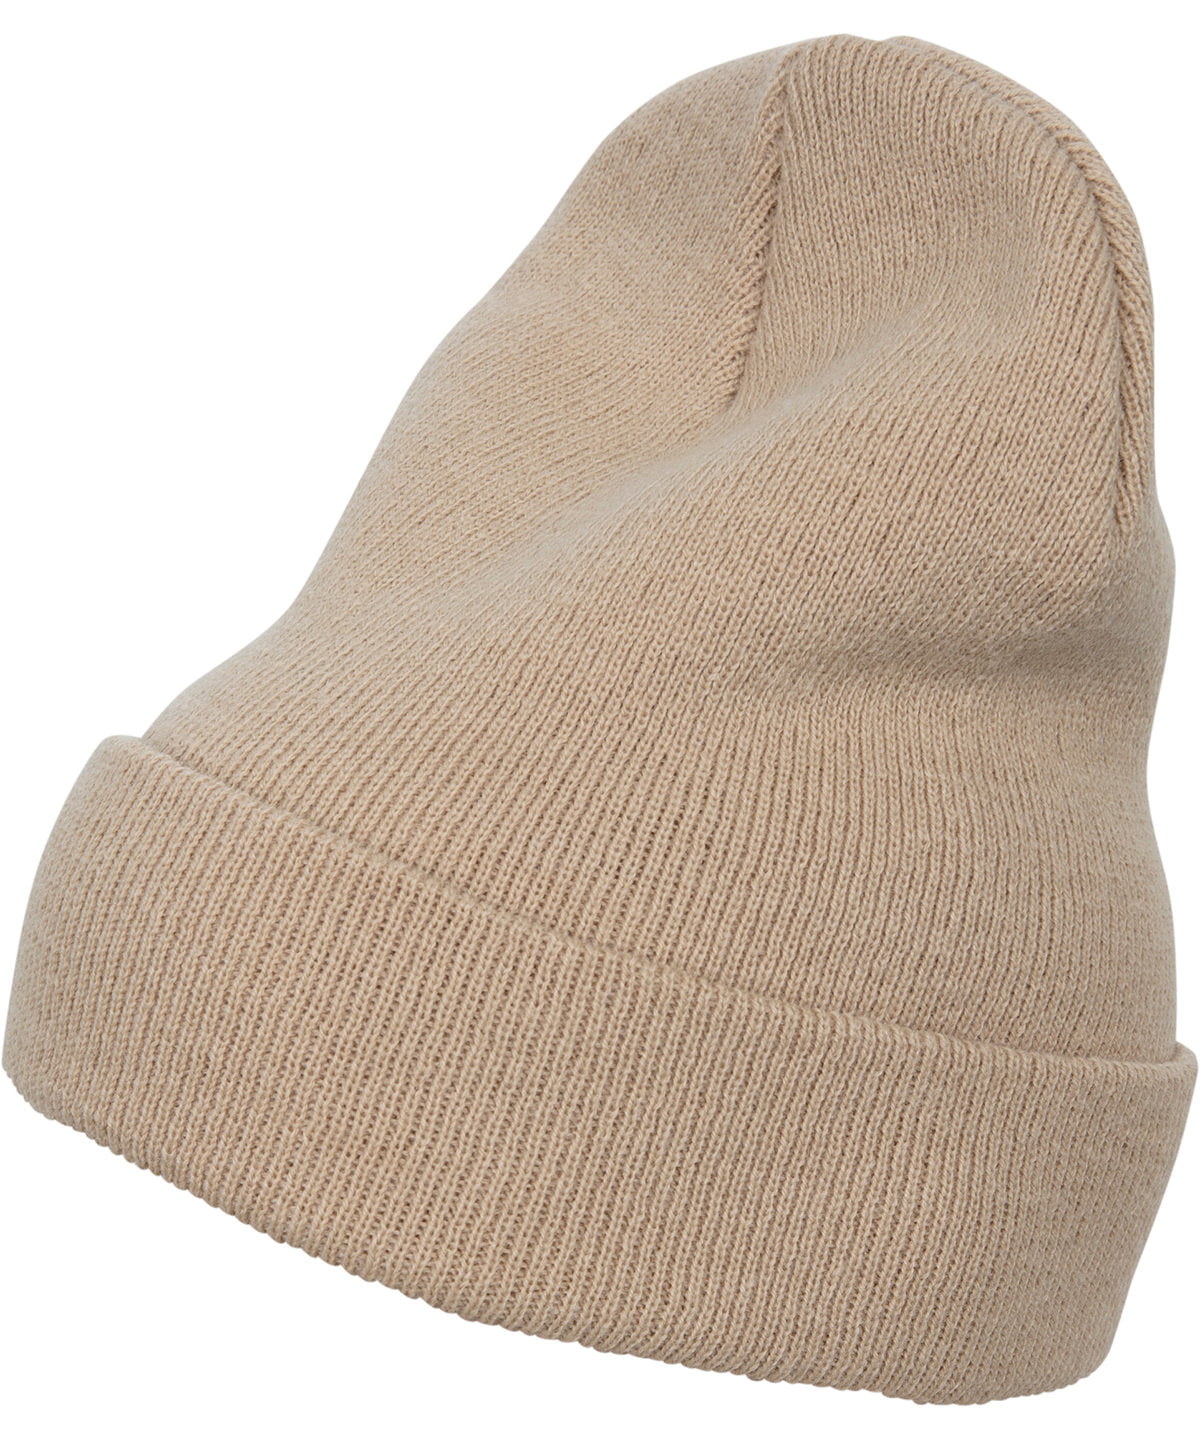 Croissant - Heavyweight long beanie (1501KC) Hats Flexfit by Yupoong Headwear, Must Haves, New Colours for 2023, Winter Essentials Schoolwear Centres